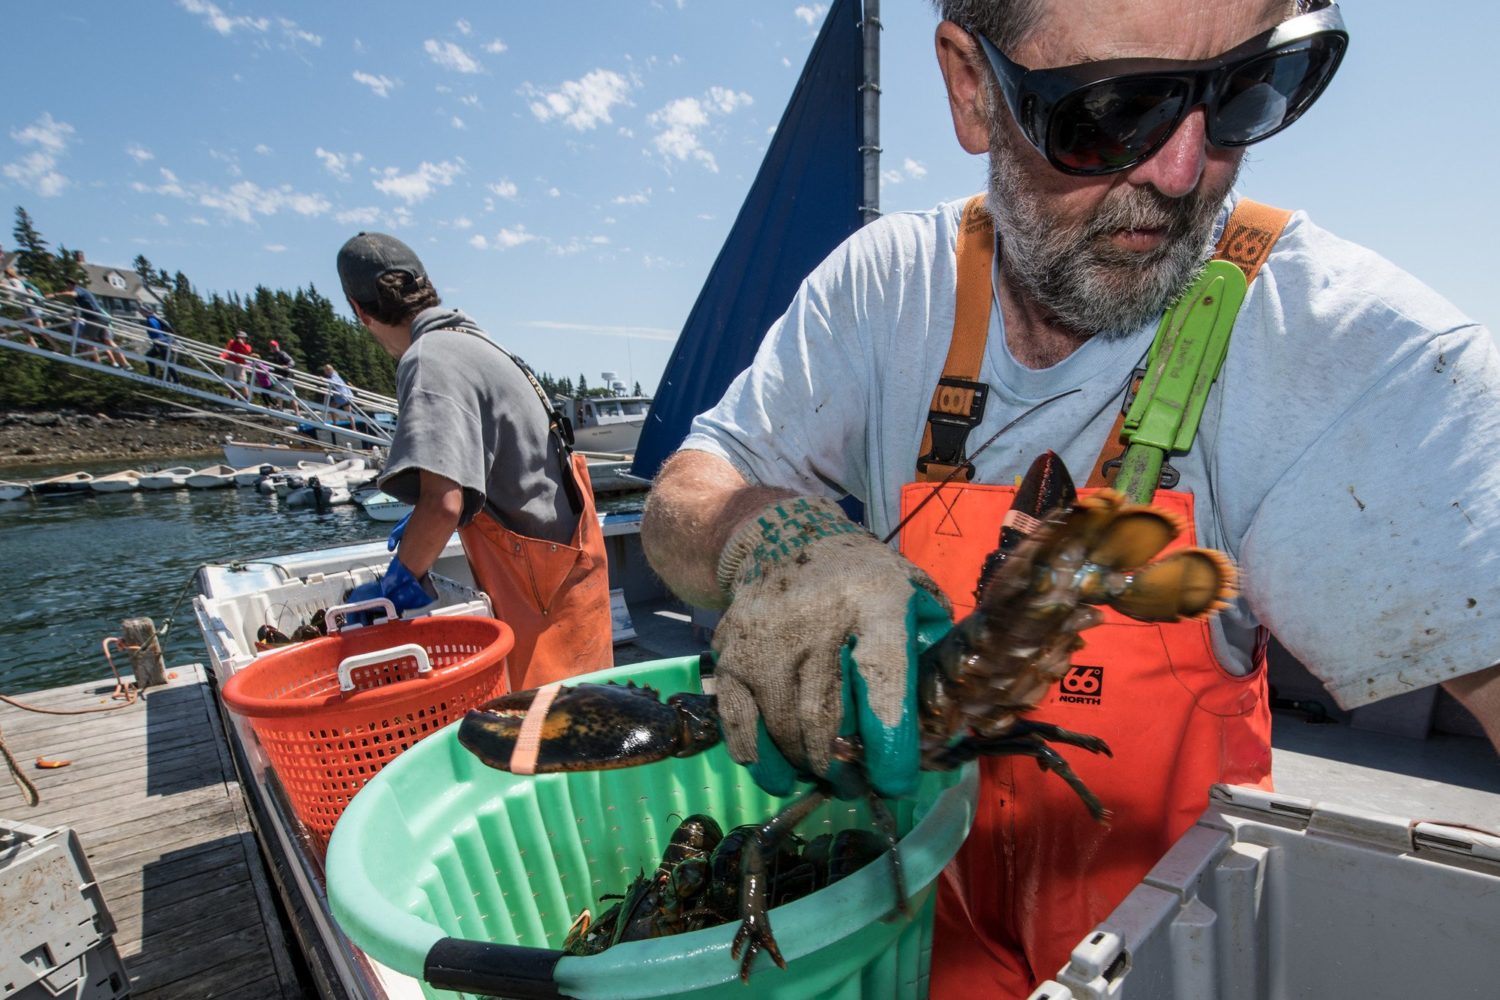 A small crew of lobster fishermen offload fresh catch onto a dock in Maine, sorting them into bins.